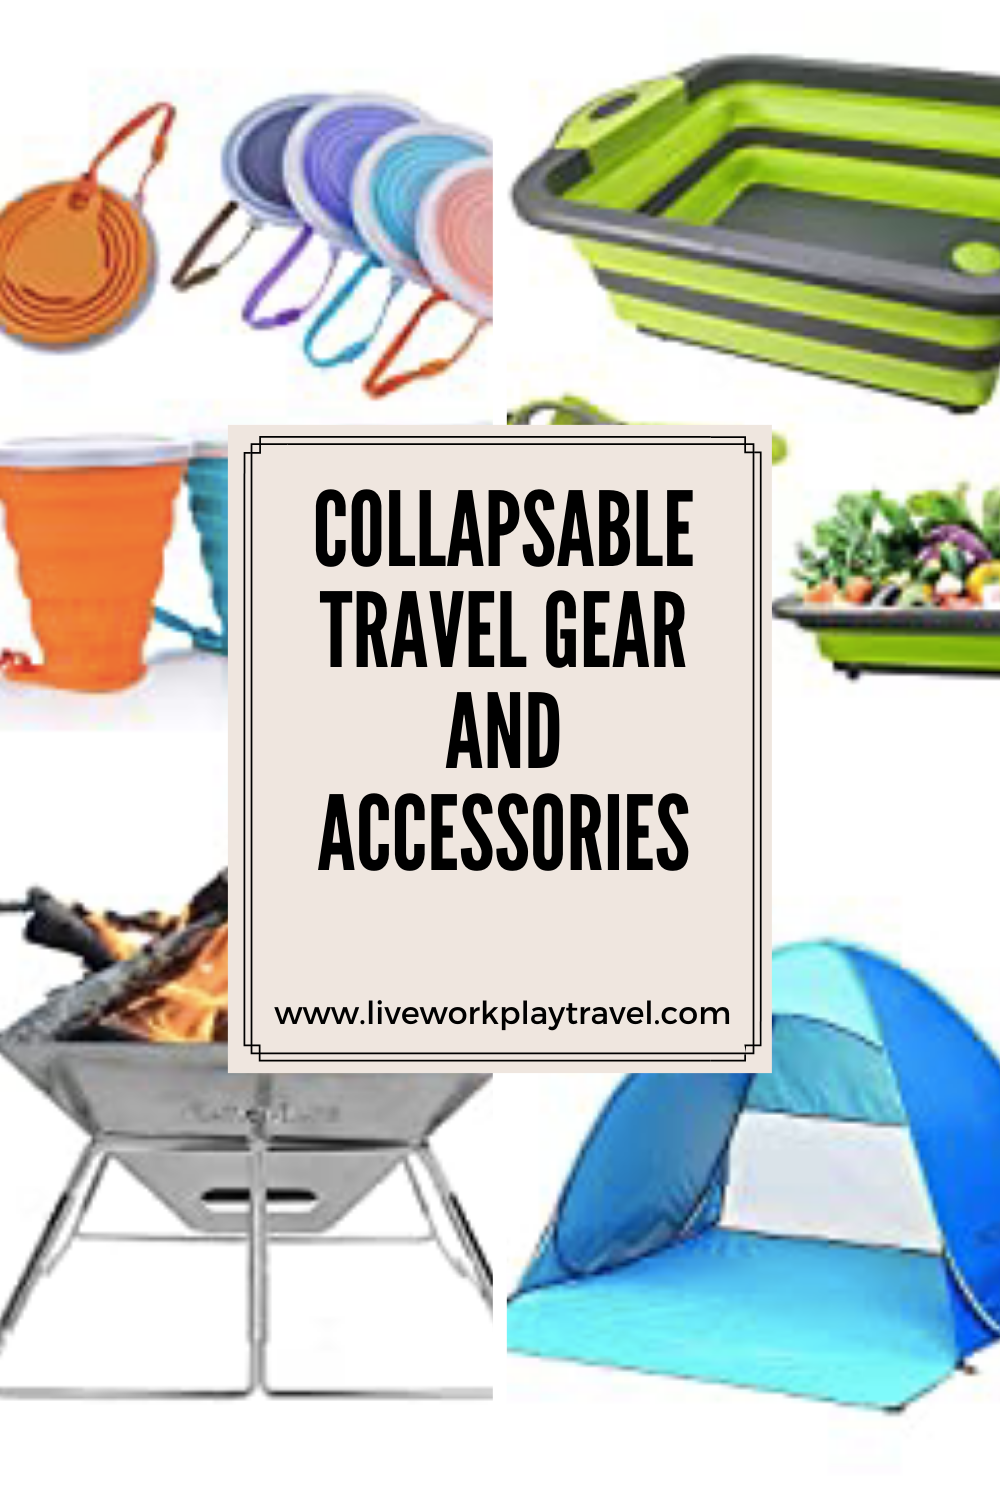 Collapsable Travel Cooking Gear PIN. Kettles, Cups, Chopping Boards and Fire Pits - All Collapsable To Save You Space When Travelling.